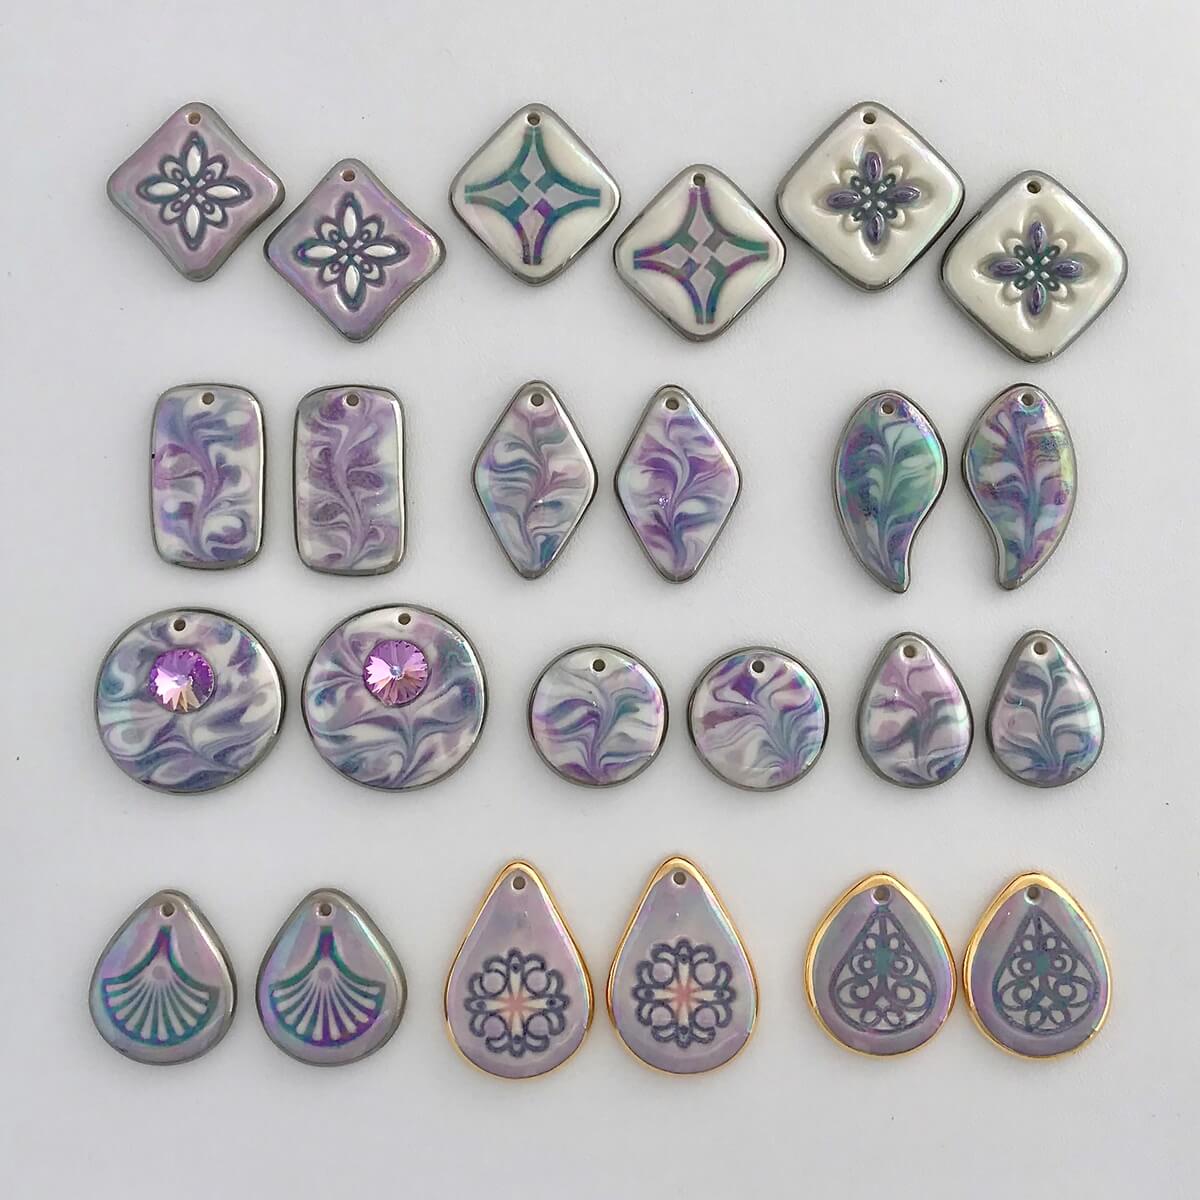 Earring components in shades of purple.